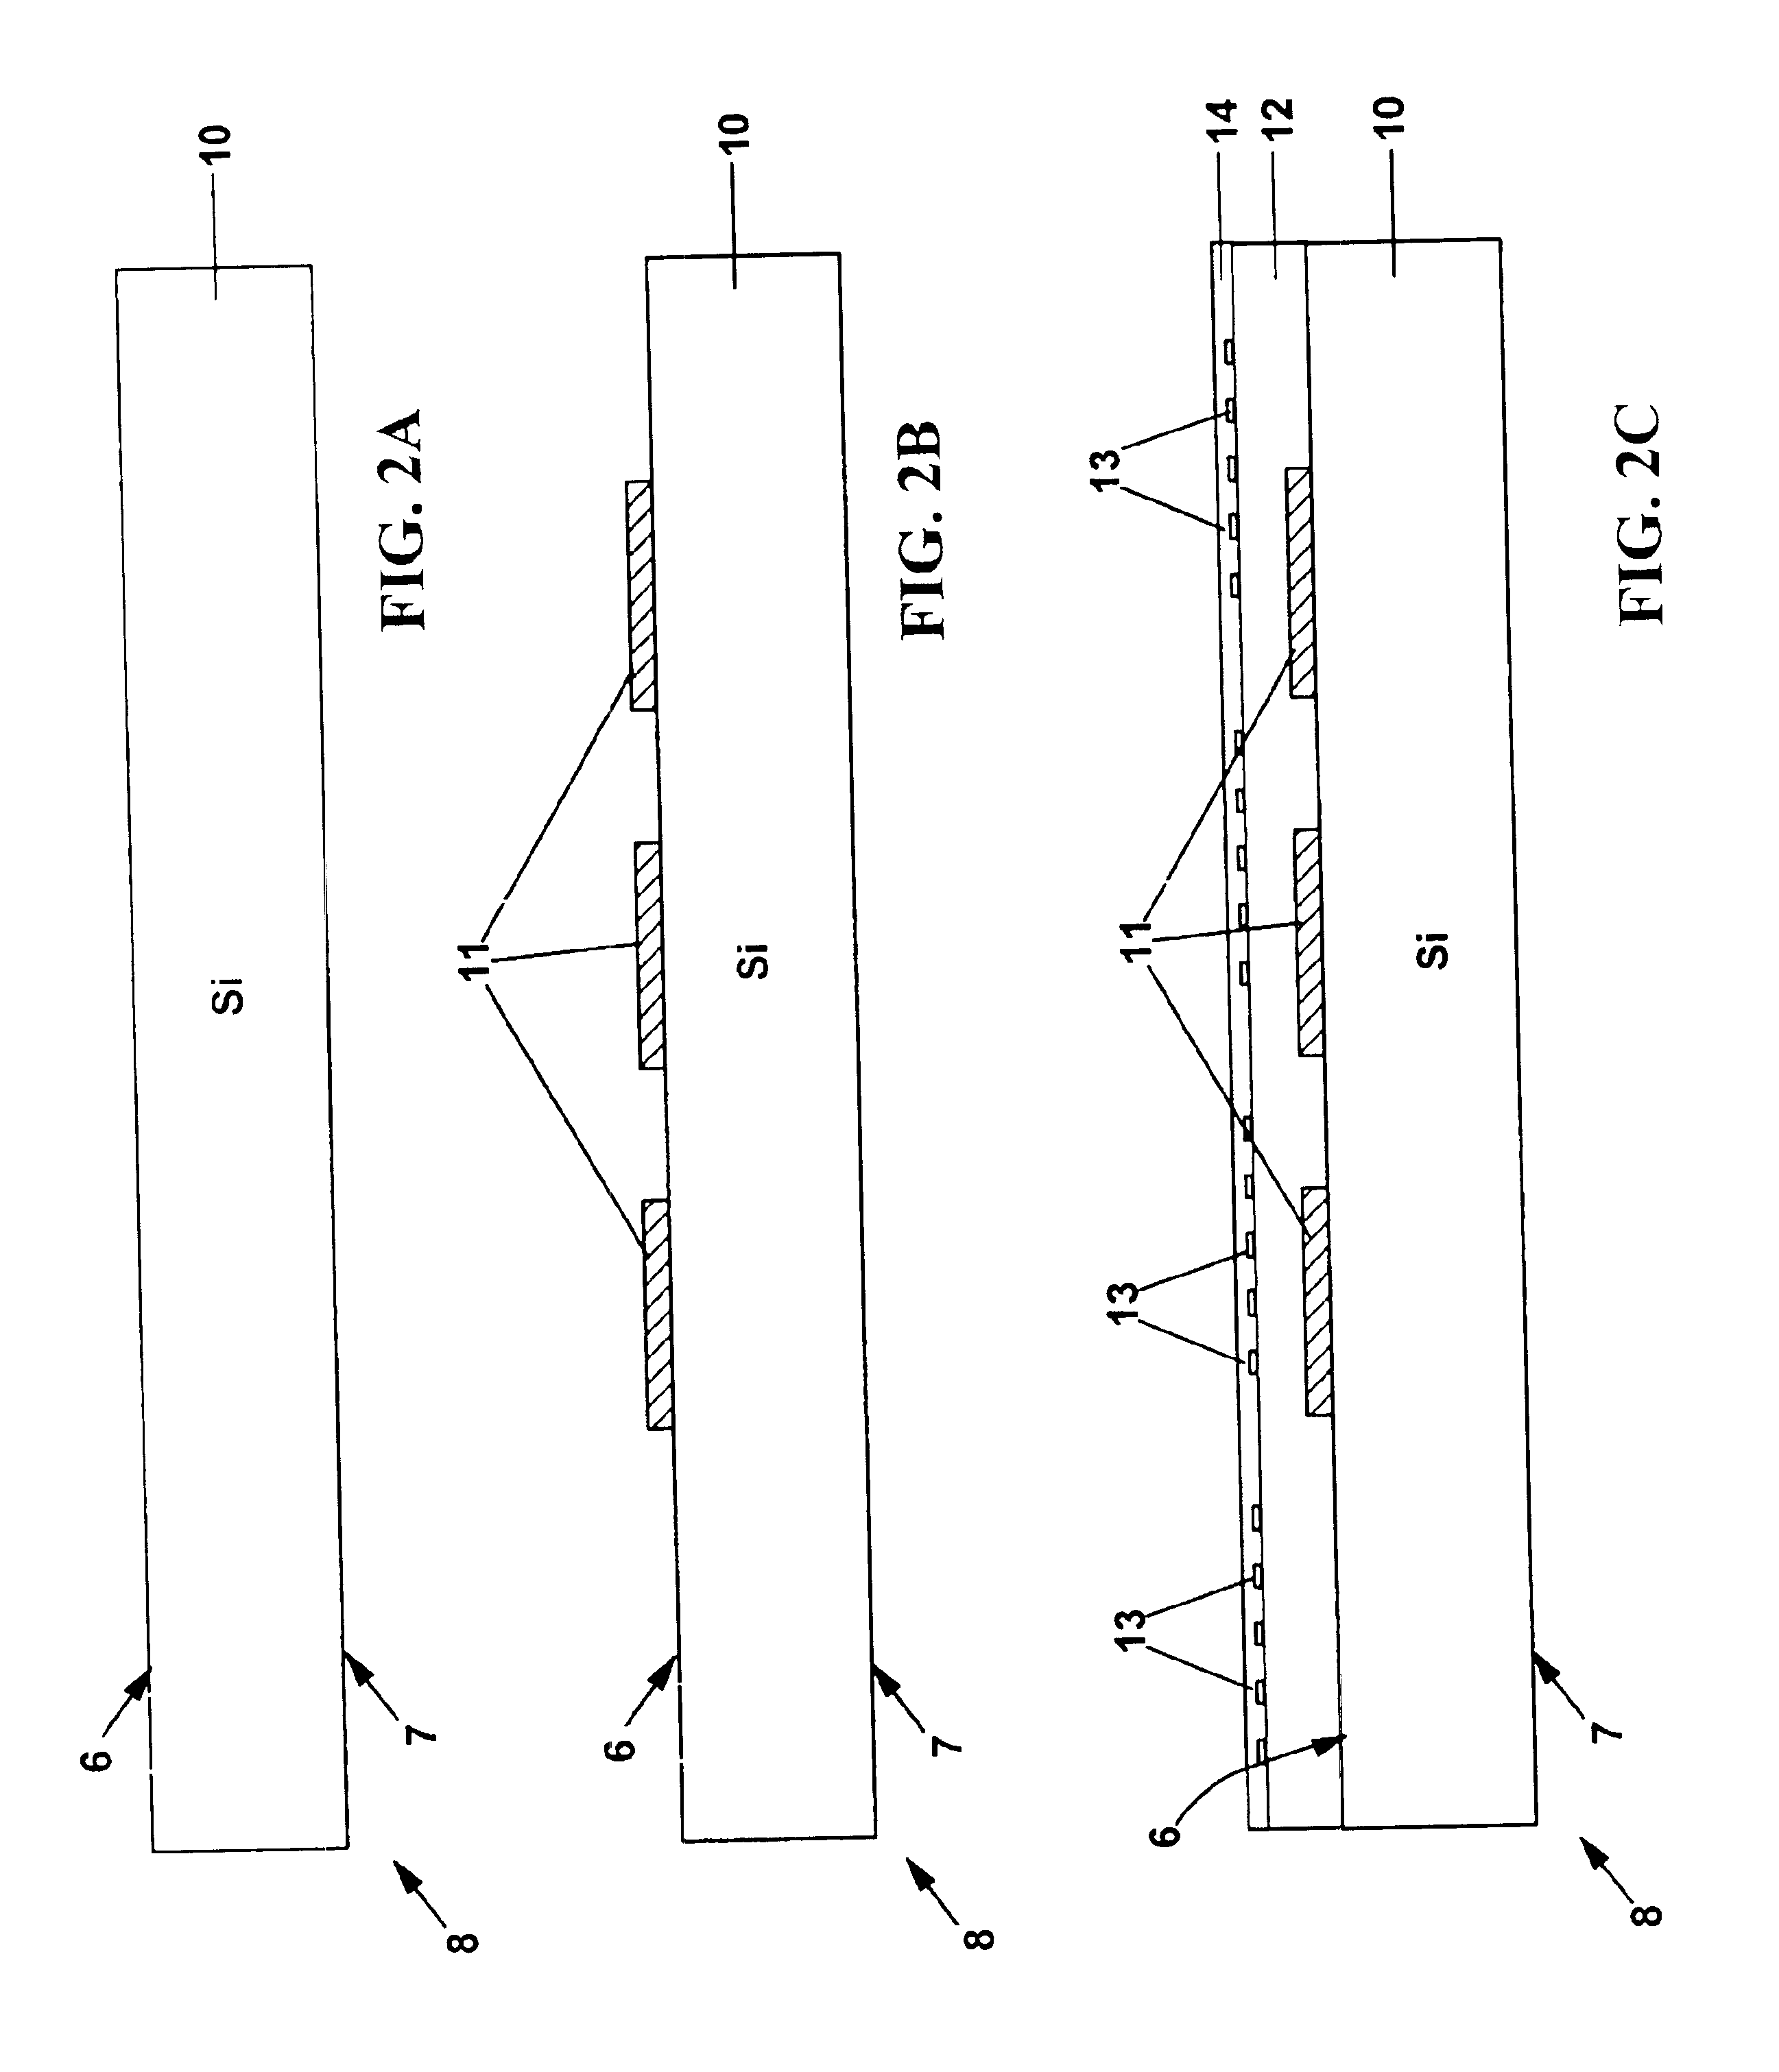 Method of manufacture of silicon based package